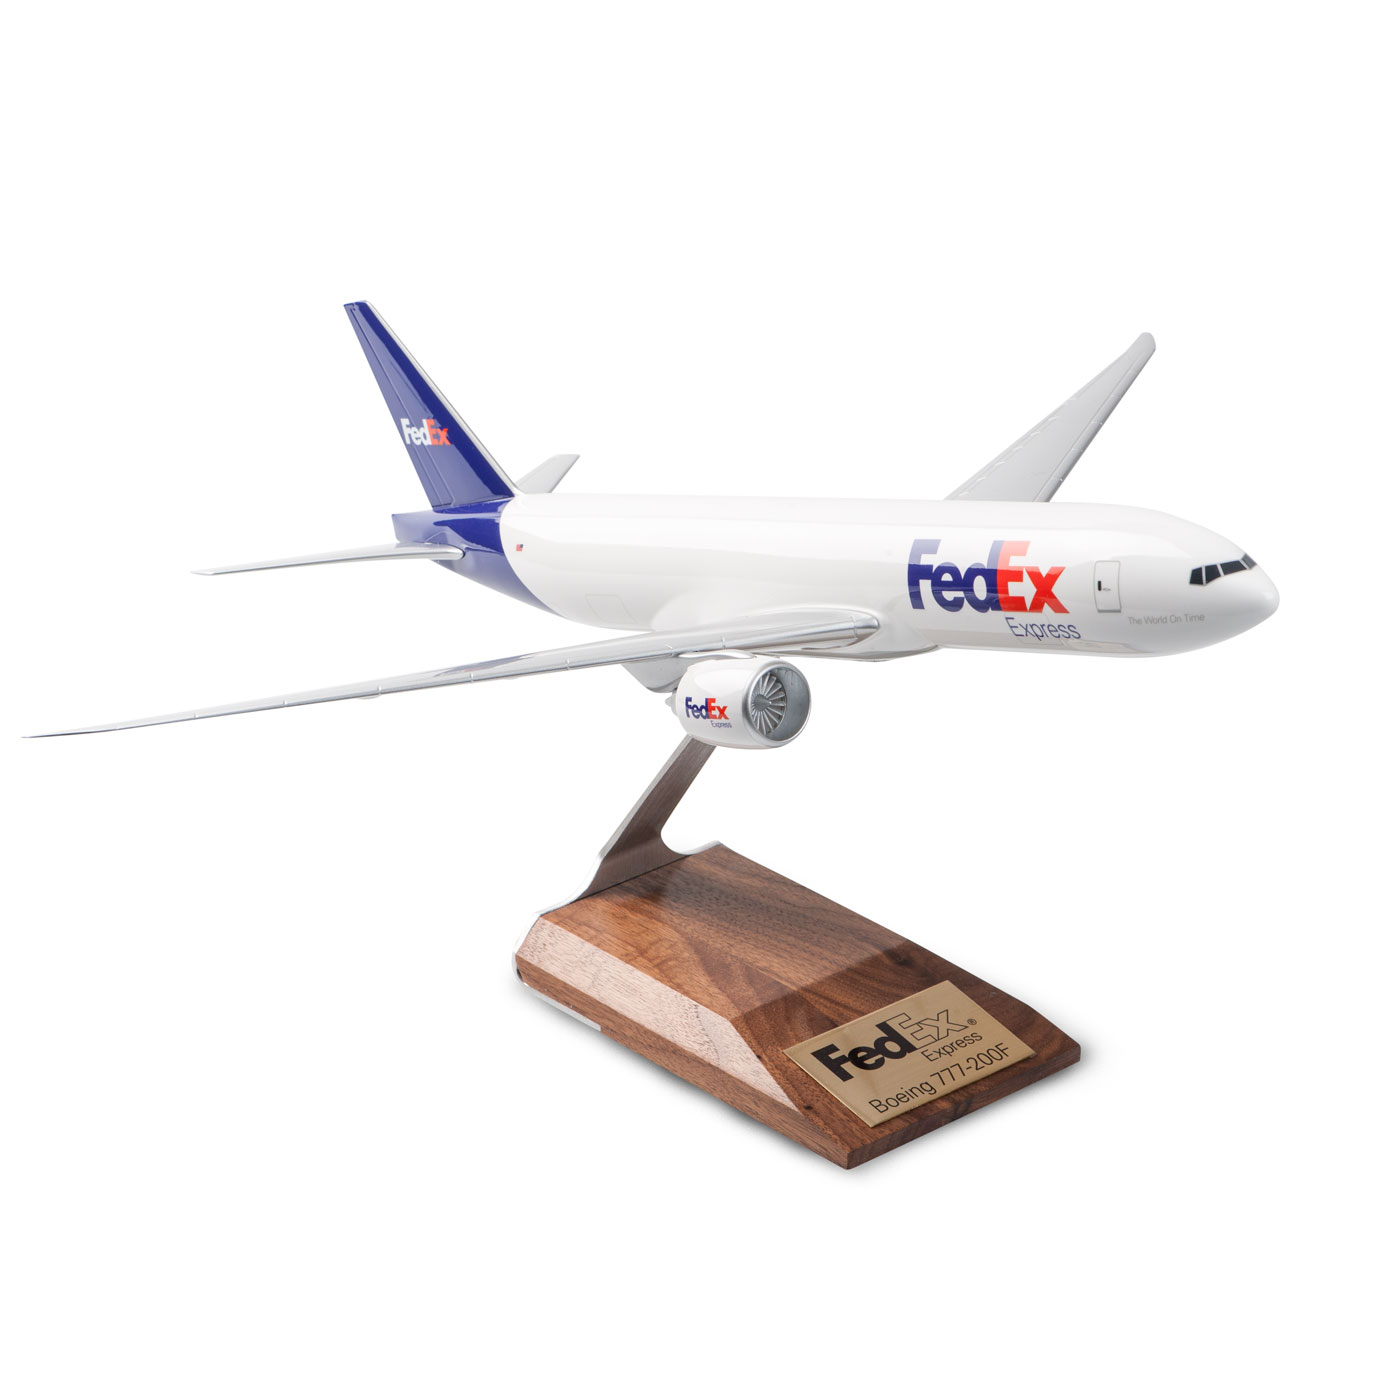 FedEx Express PacMin Deluxe Express 777 1:144 | The FedEx Company